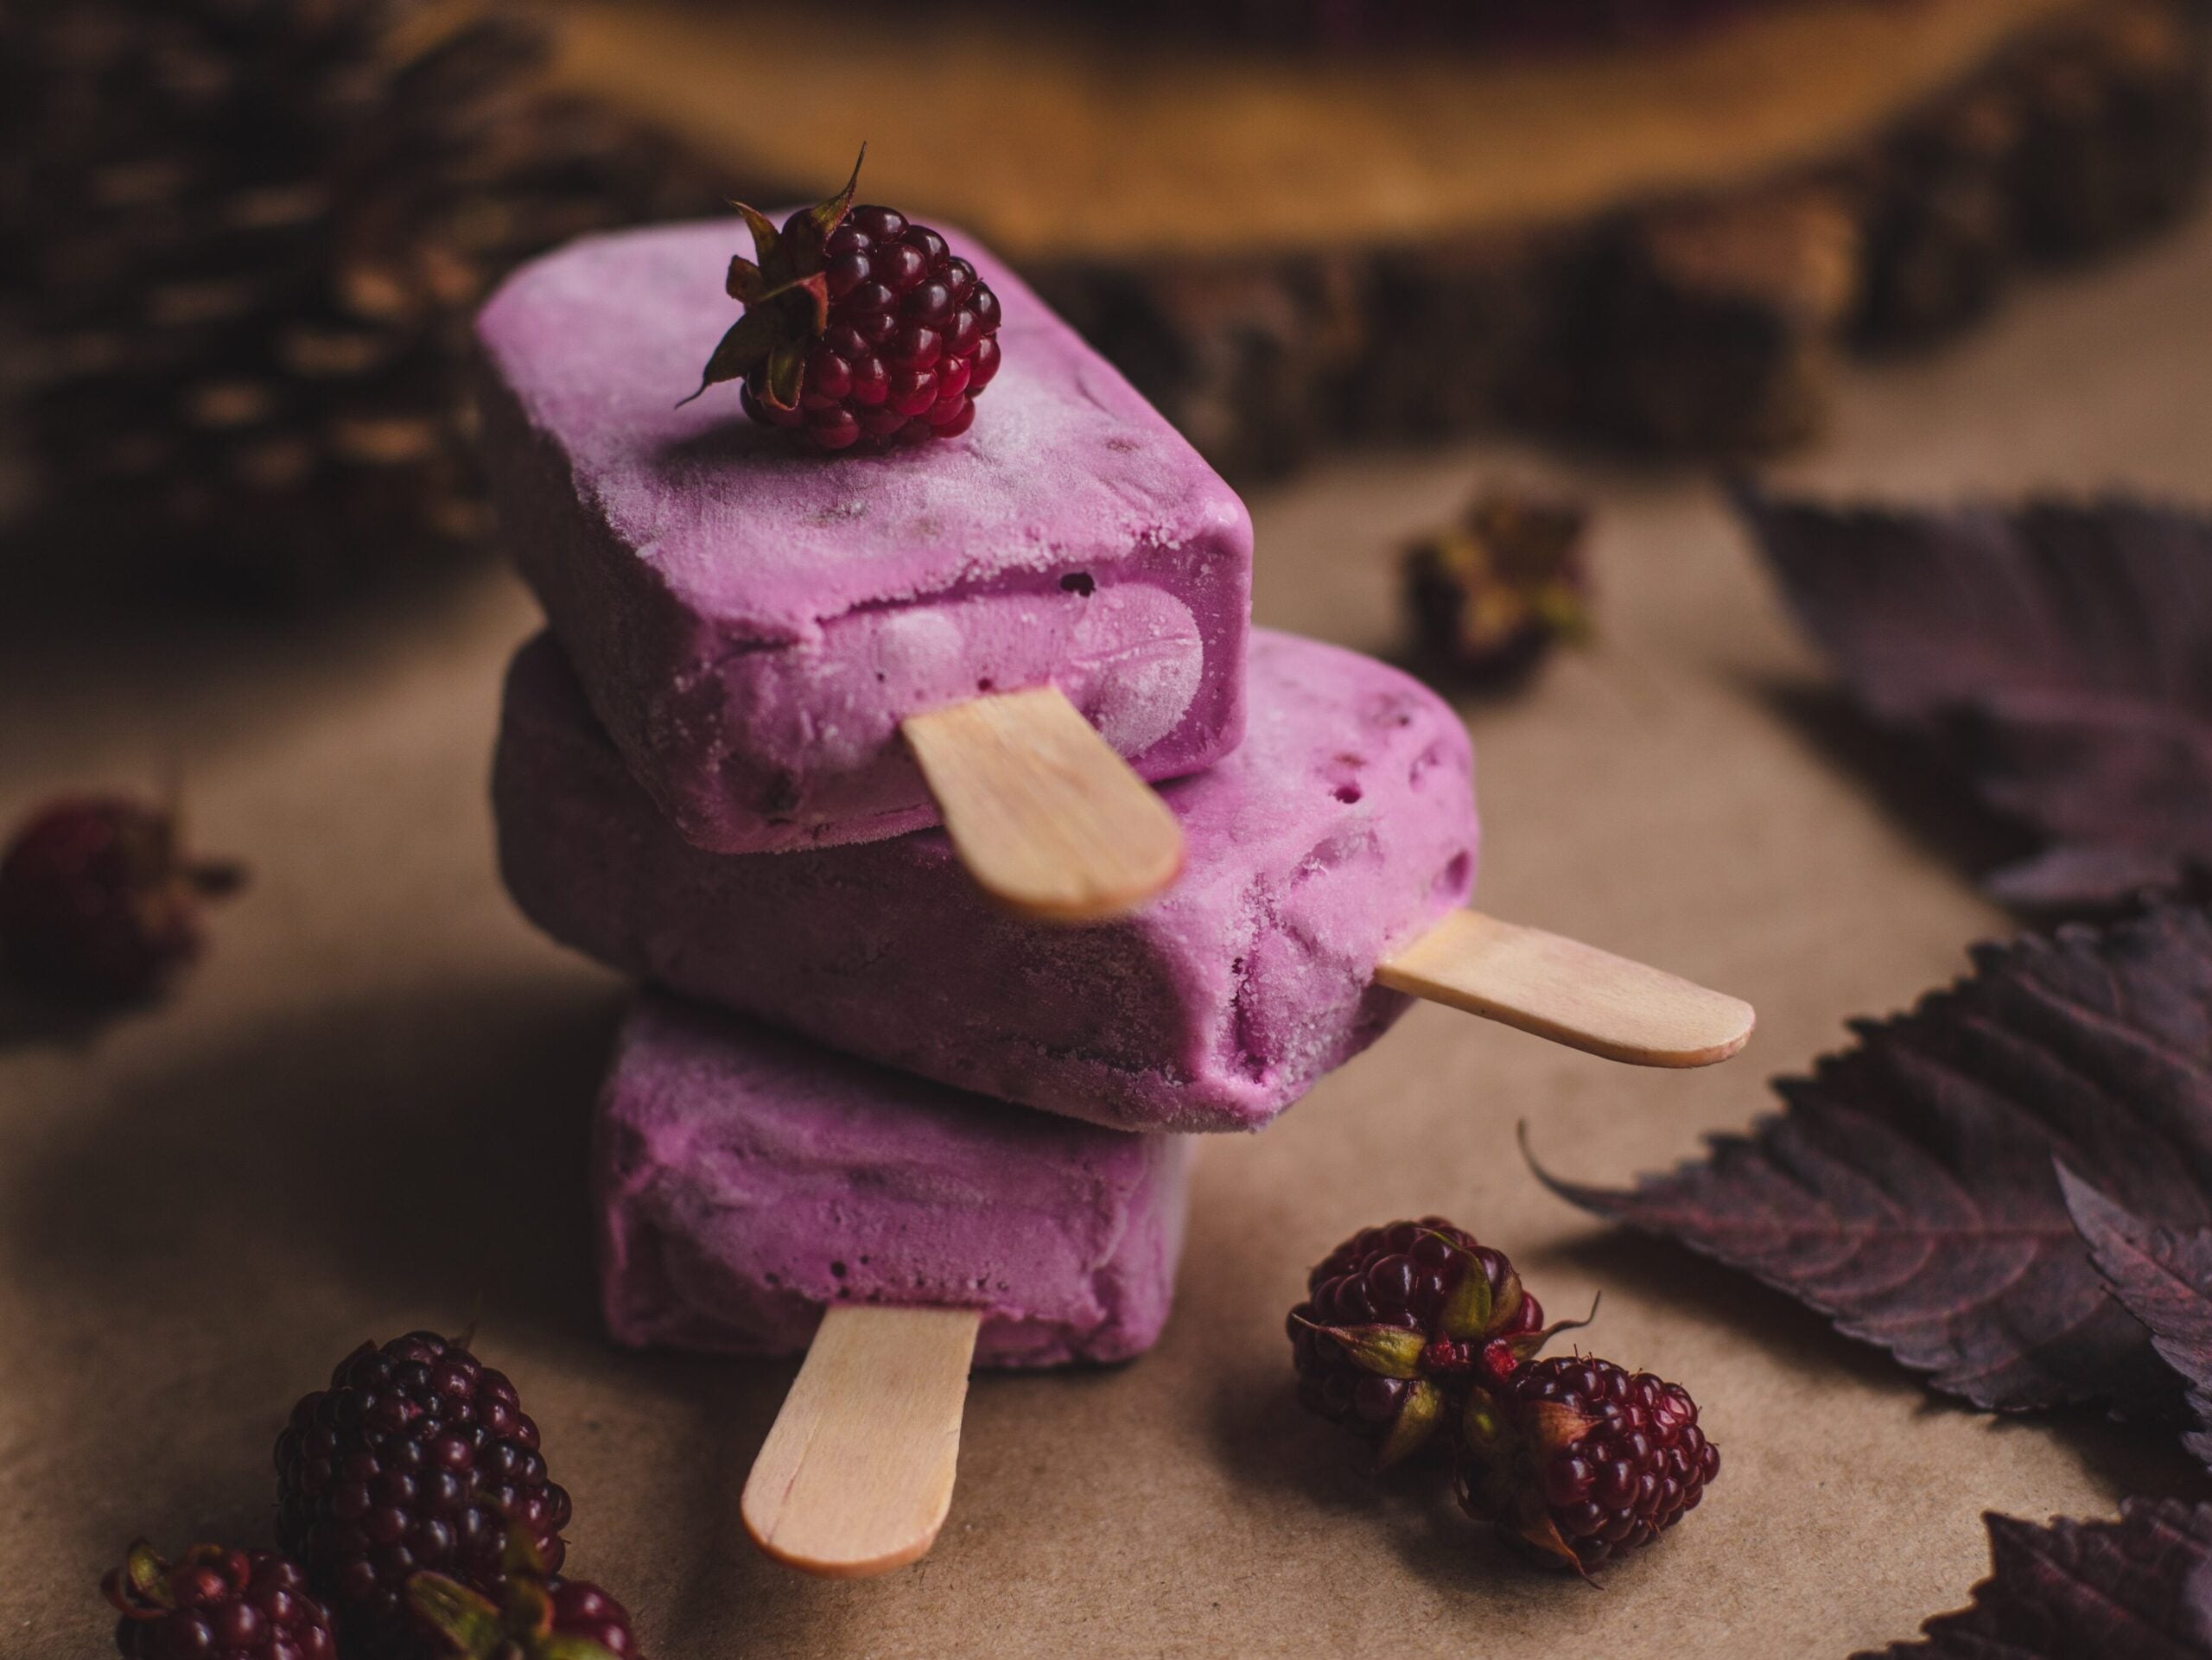 Raspberry purple popsicles serve as a great example of how angling your food photography the right way can make your food creations look even better than they taste.